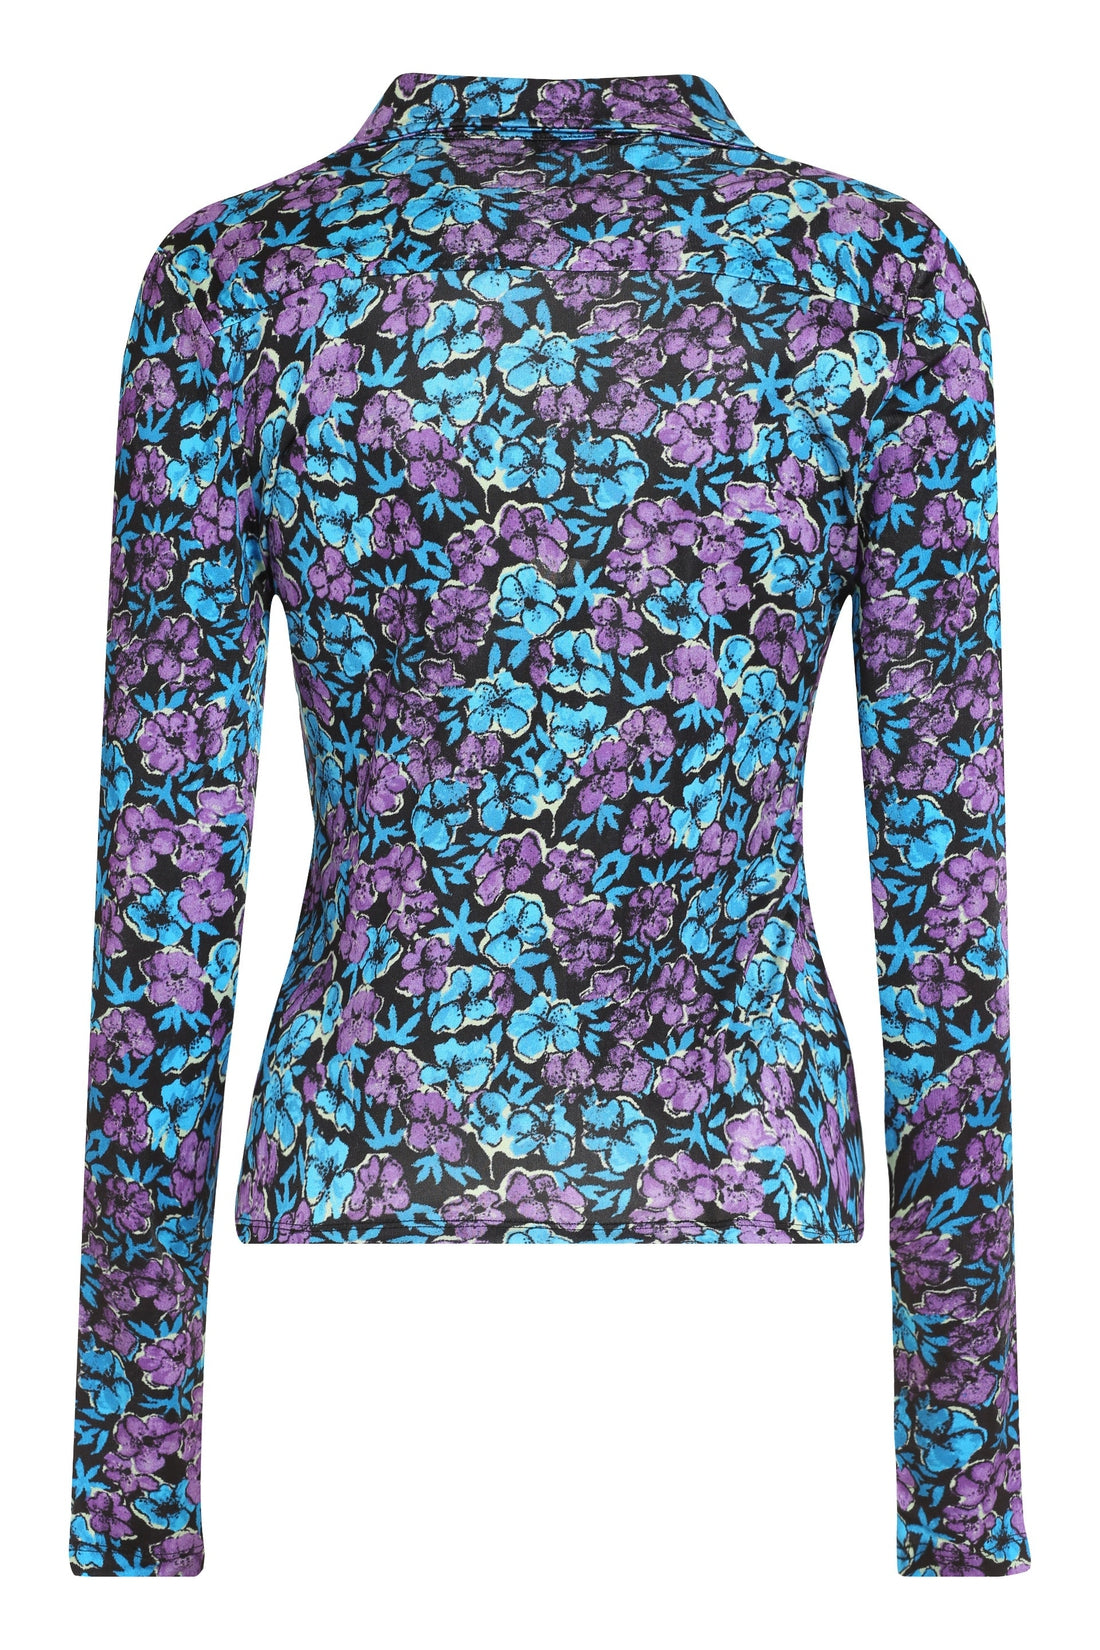 Piralo-OUTLET-SALE-Mariah printed long-sleeve top-ARCHIVIST